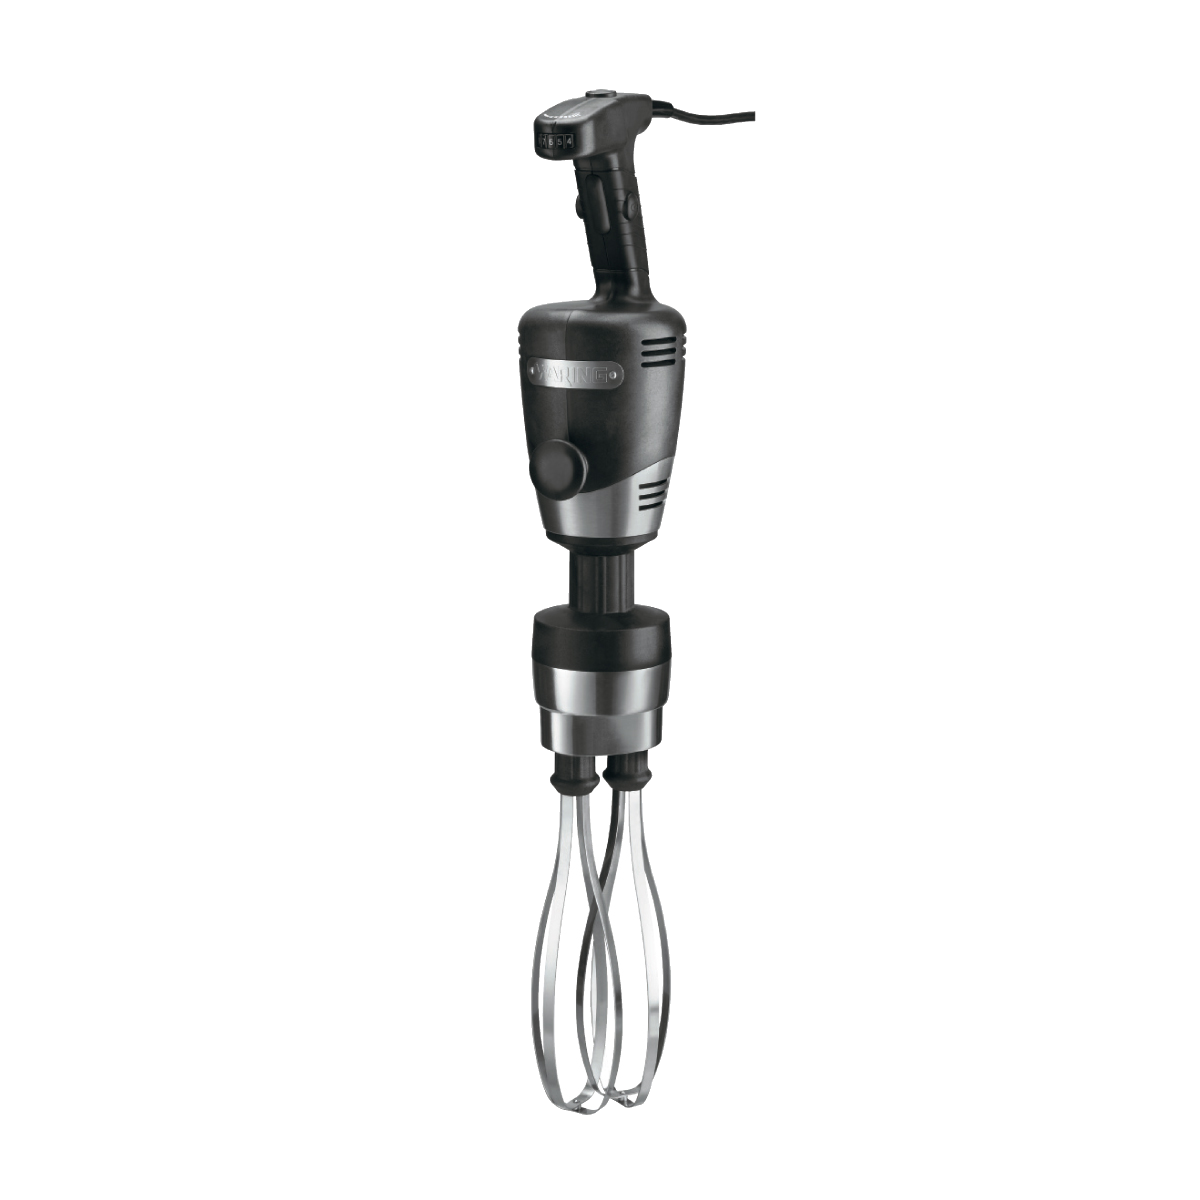 https://www.waringcommercialproducts.com/files/products/wsbppw-waring-immersion-blender-main.png